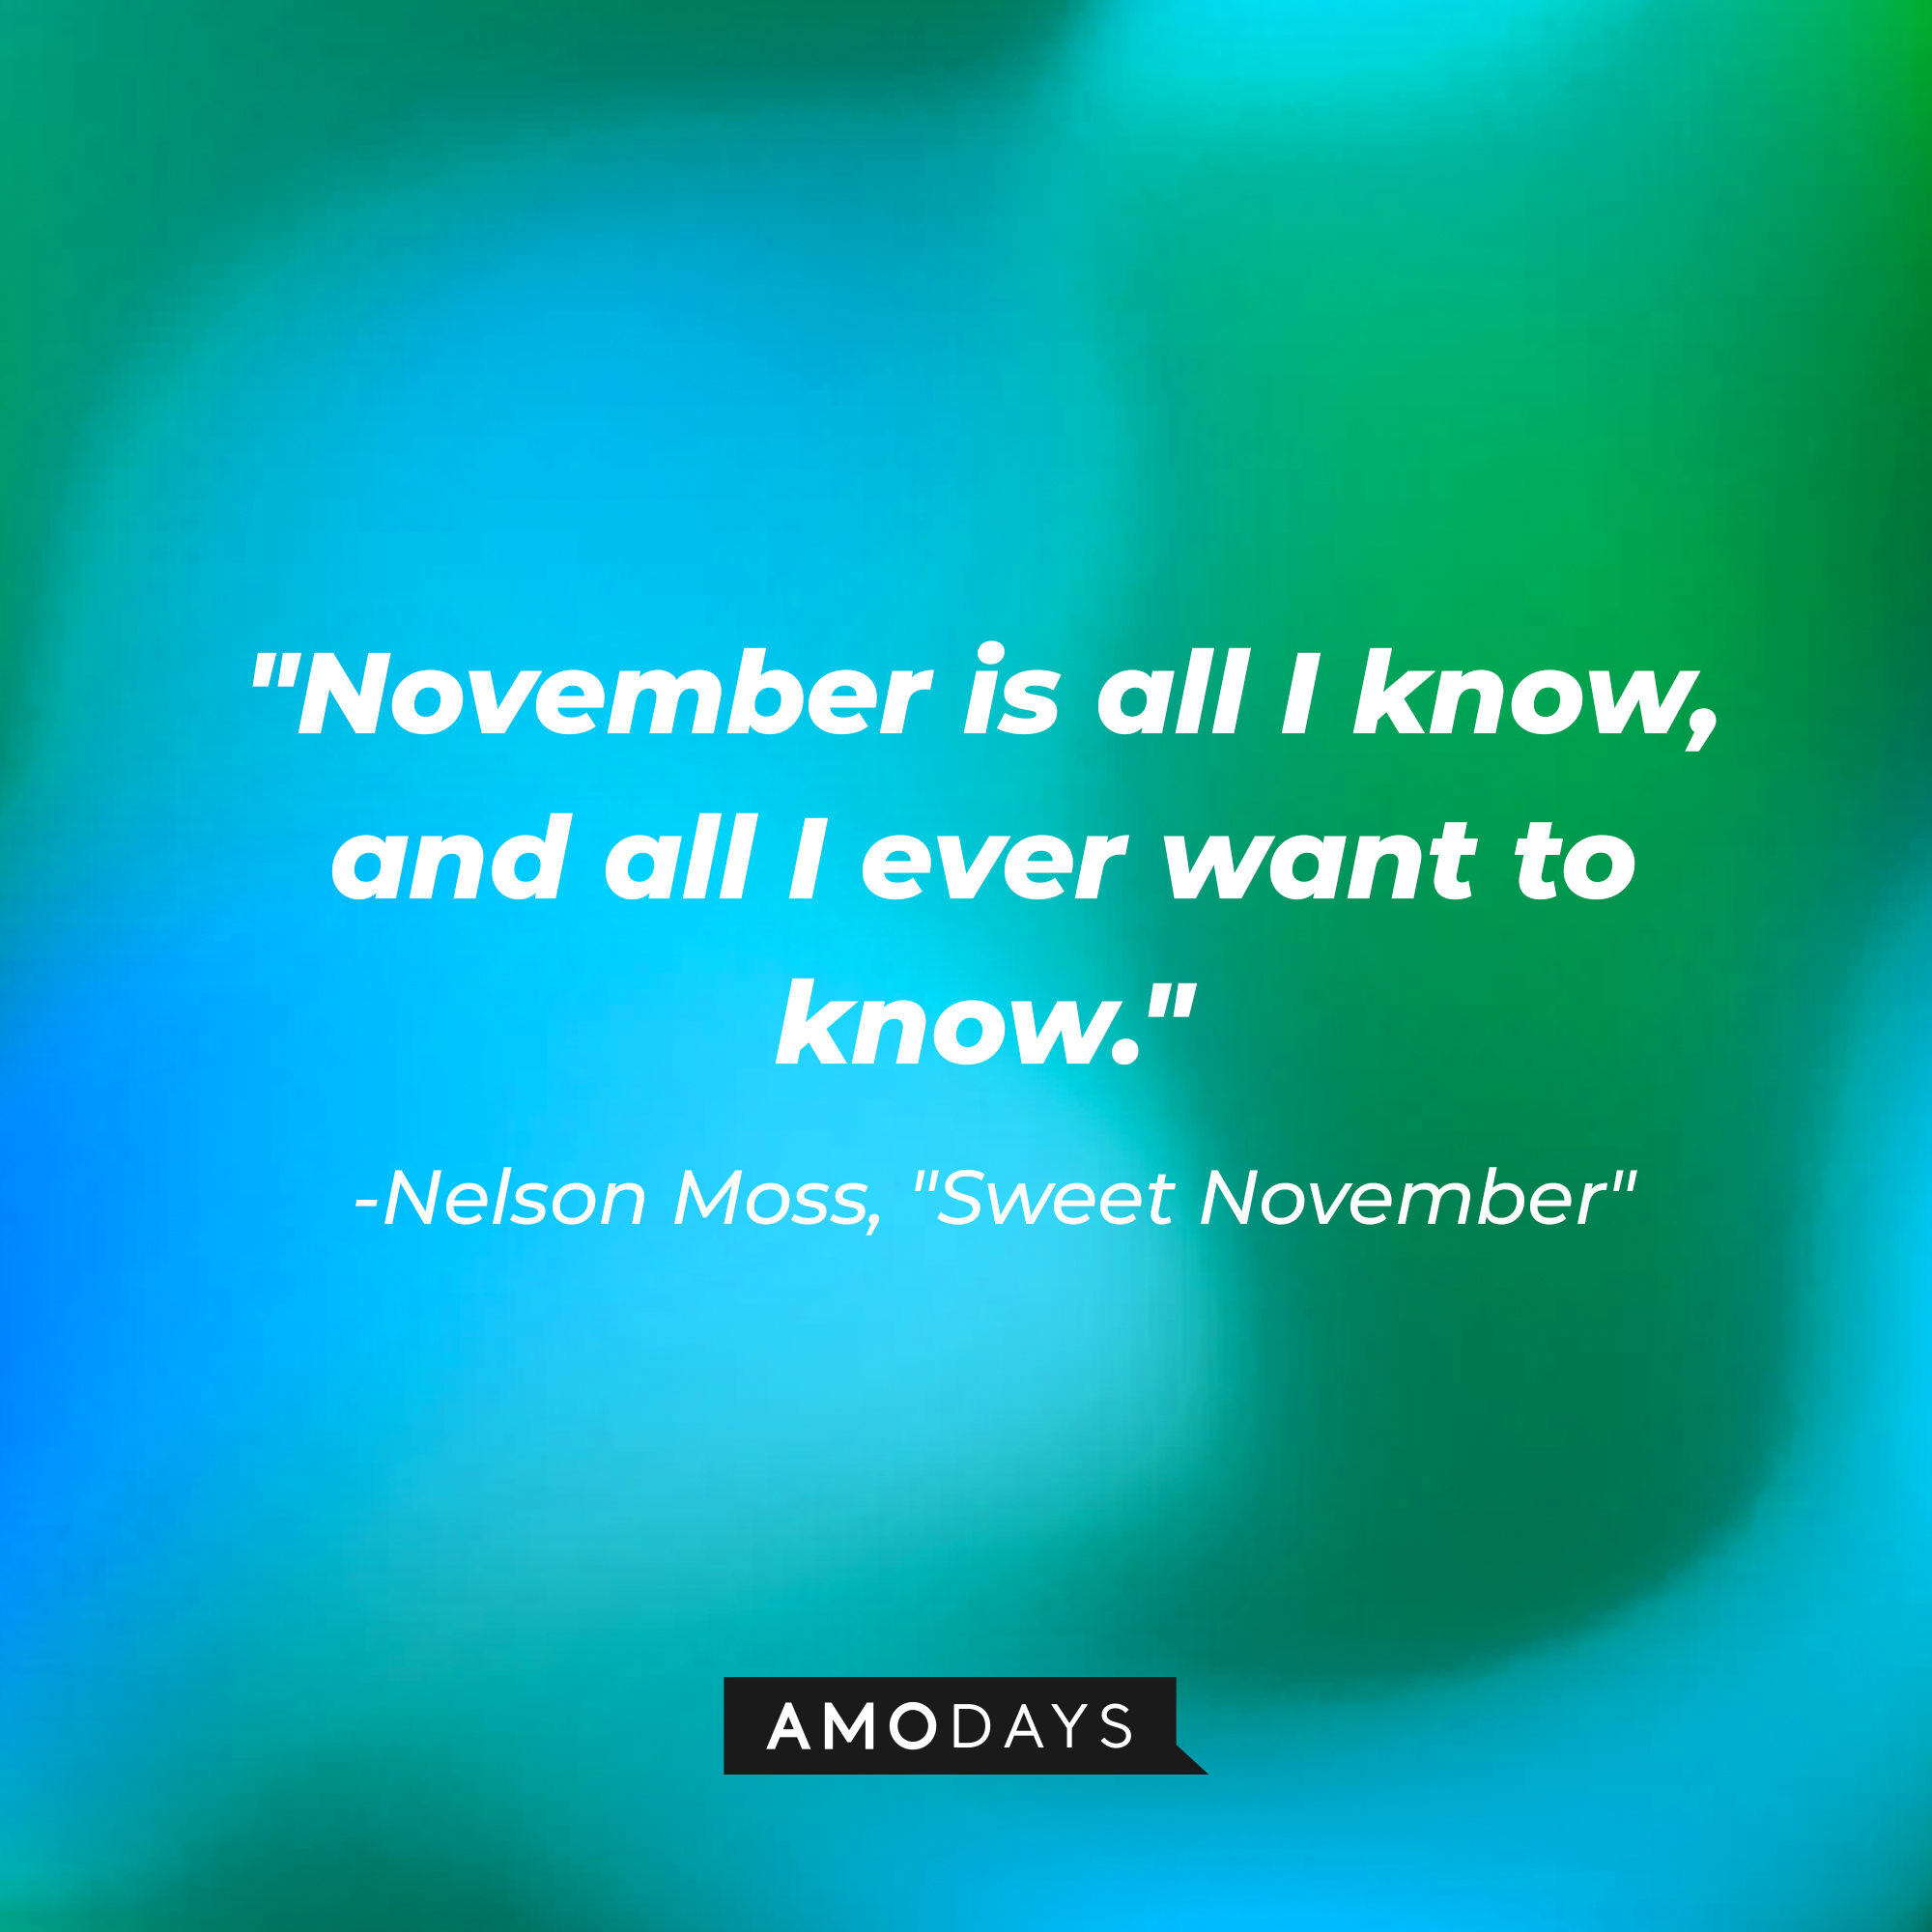 Nelson Moss' quote: "November is all I know, and all I ever want to know." | Source: AmoDays